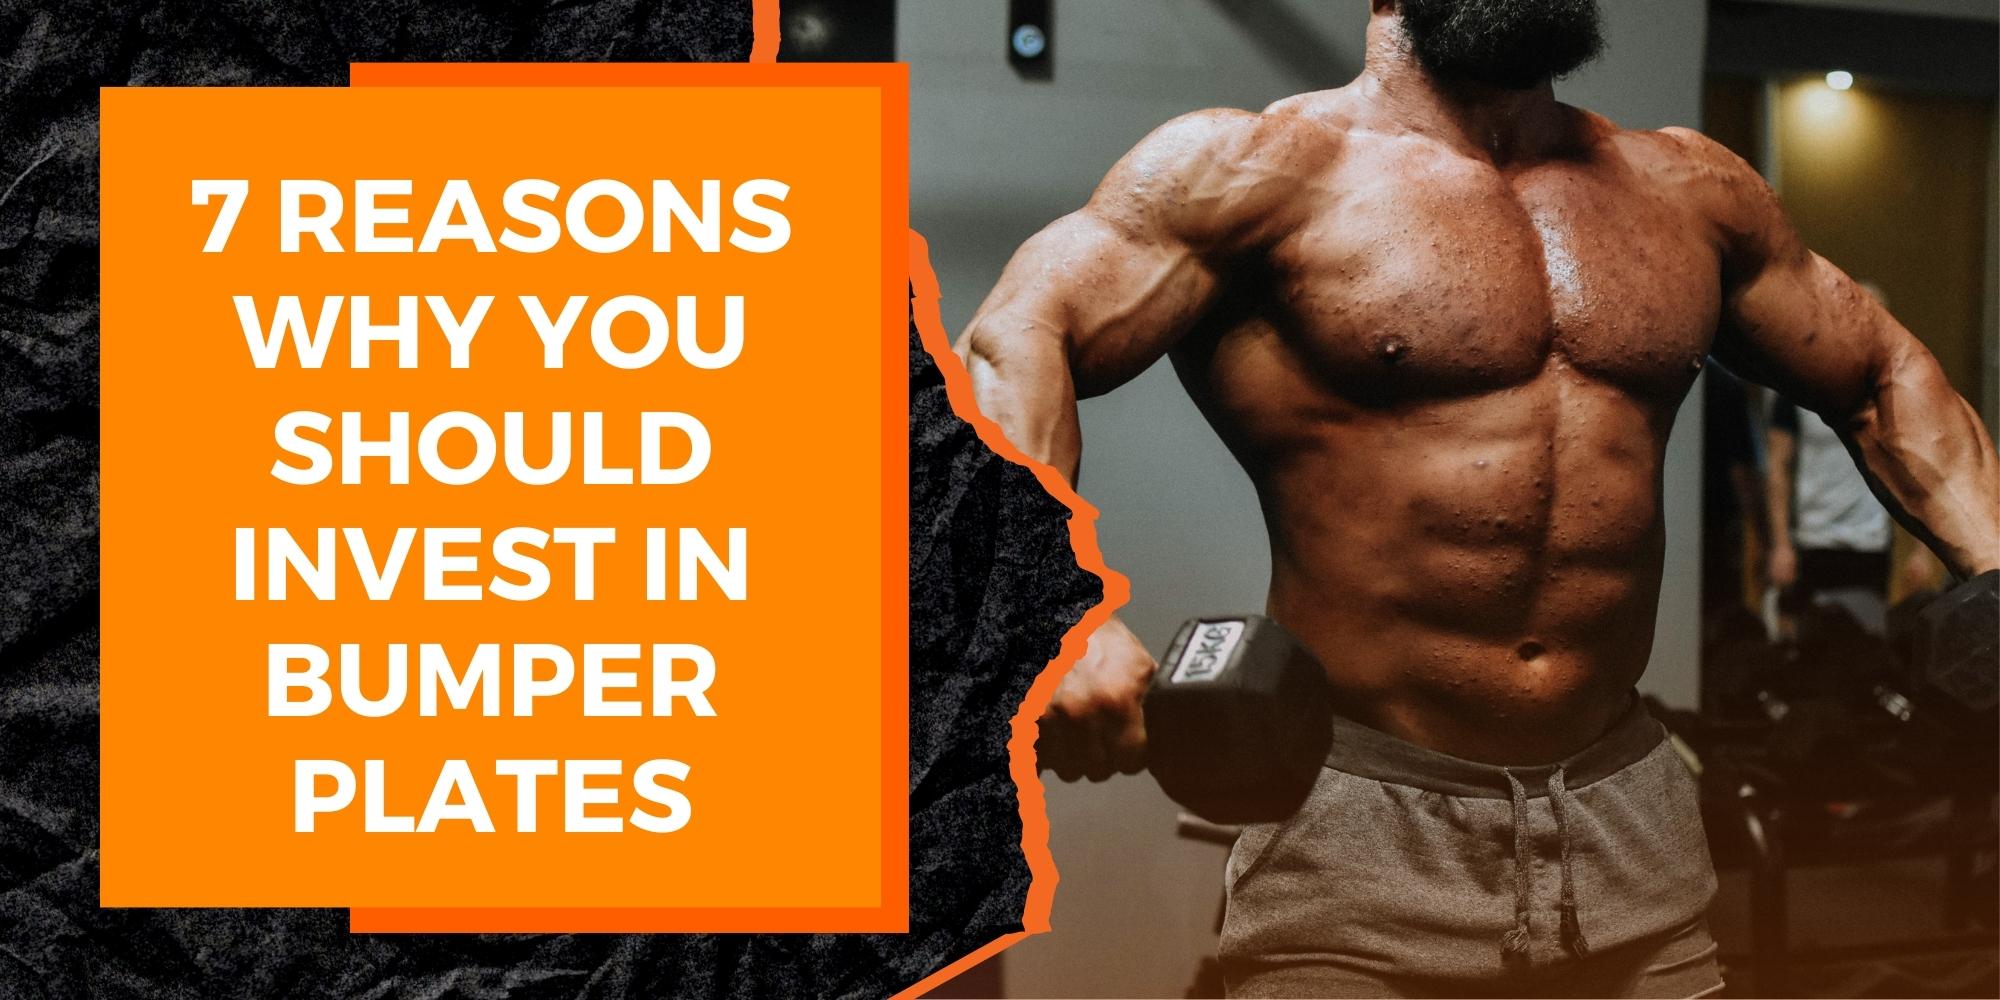 7 Reasons Why You Should Invest in Bumper Plates